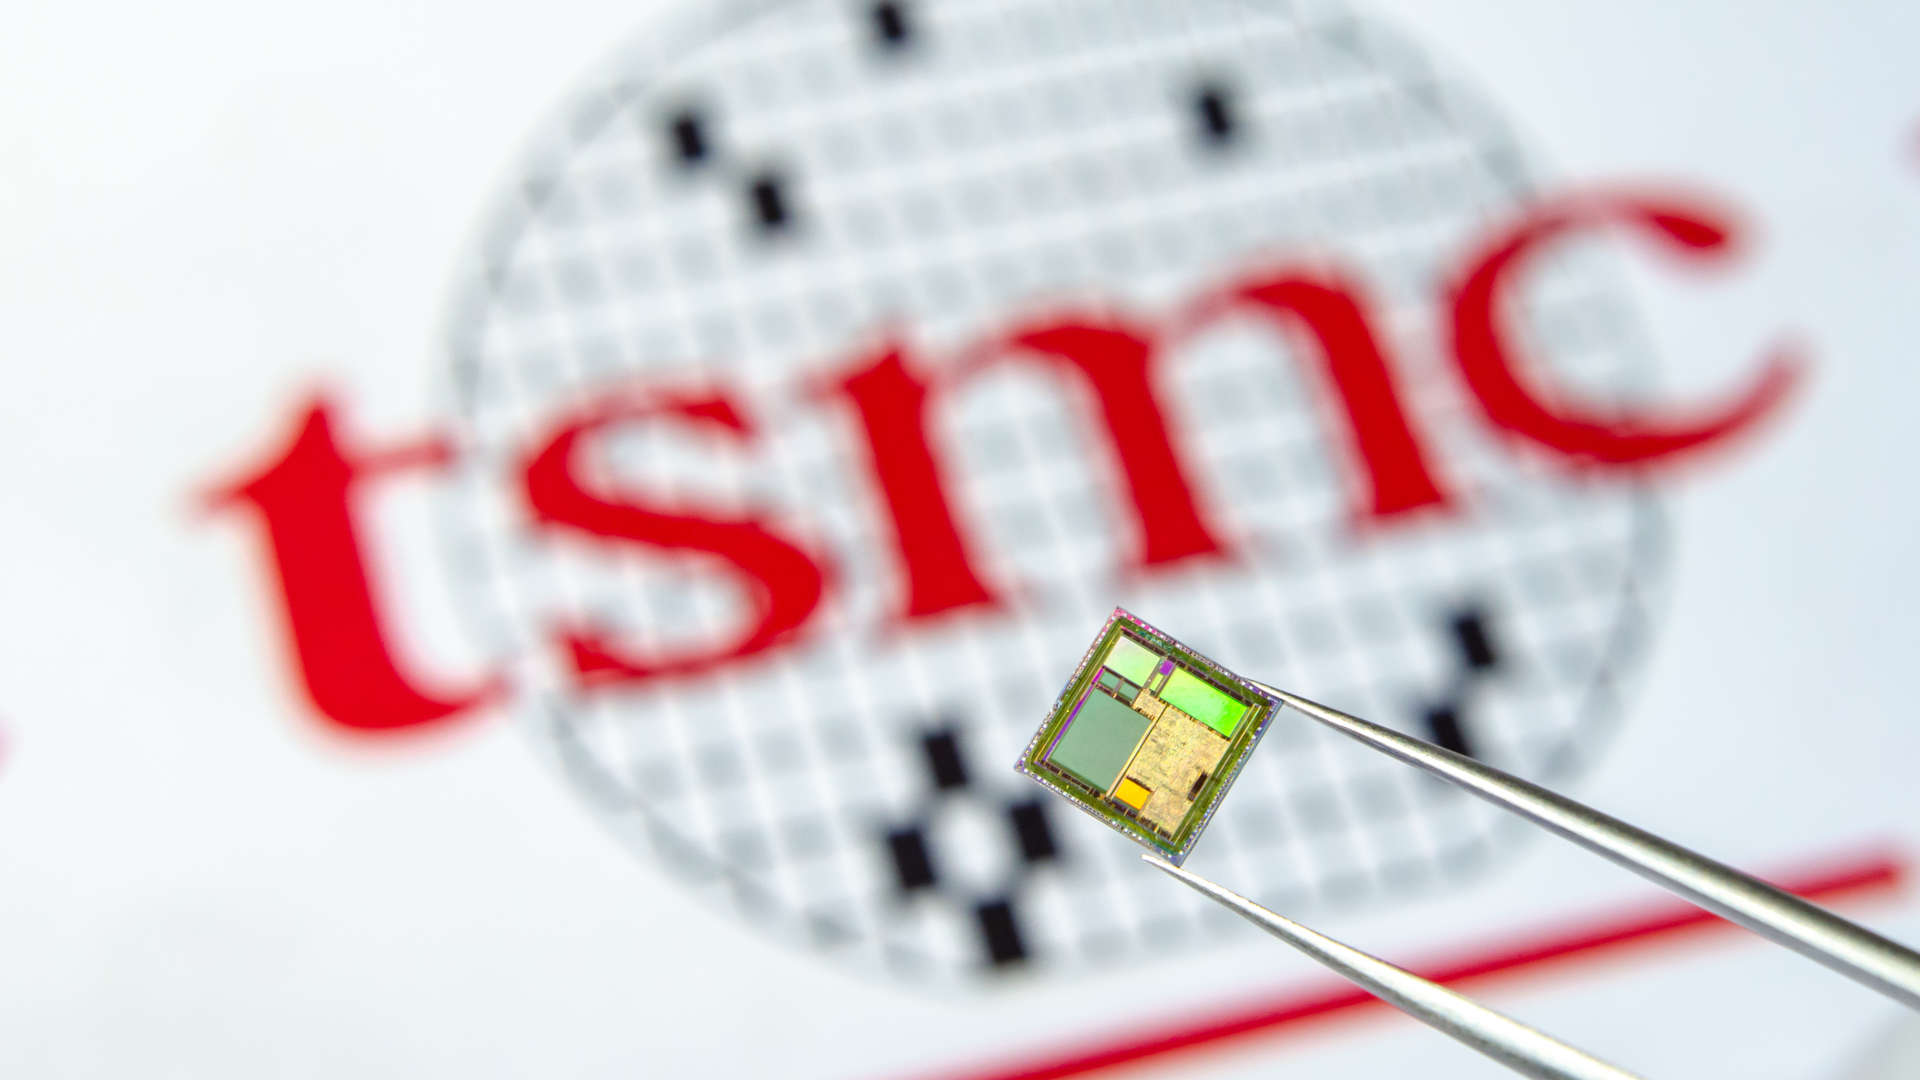 tsmc-reportedly-plans-volume-production-for-4nm-process-this-year